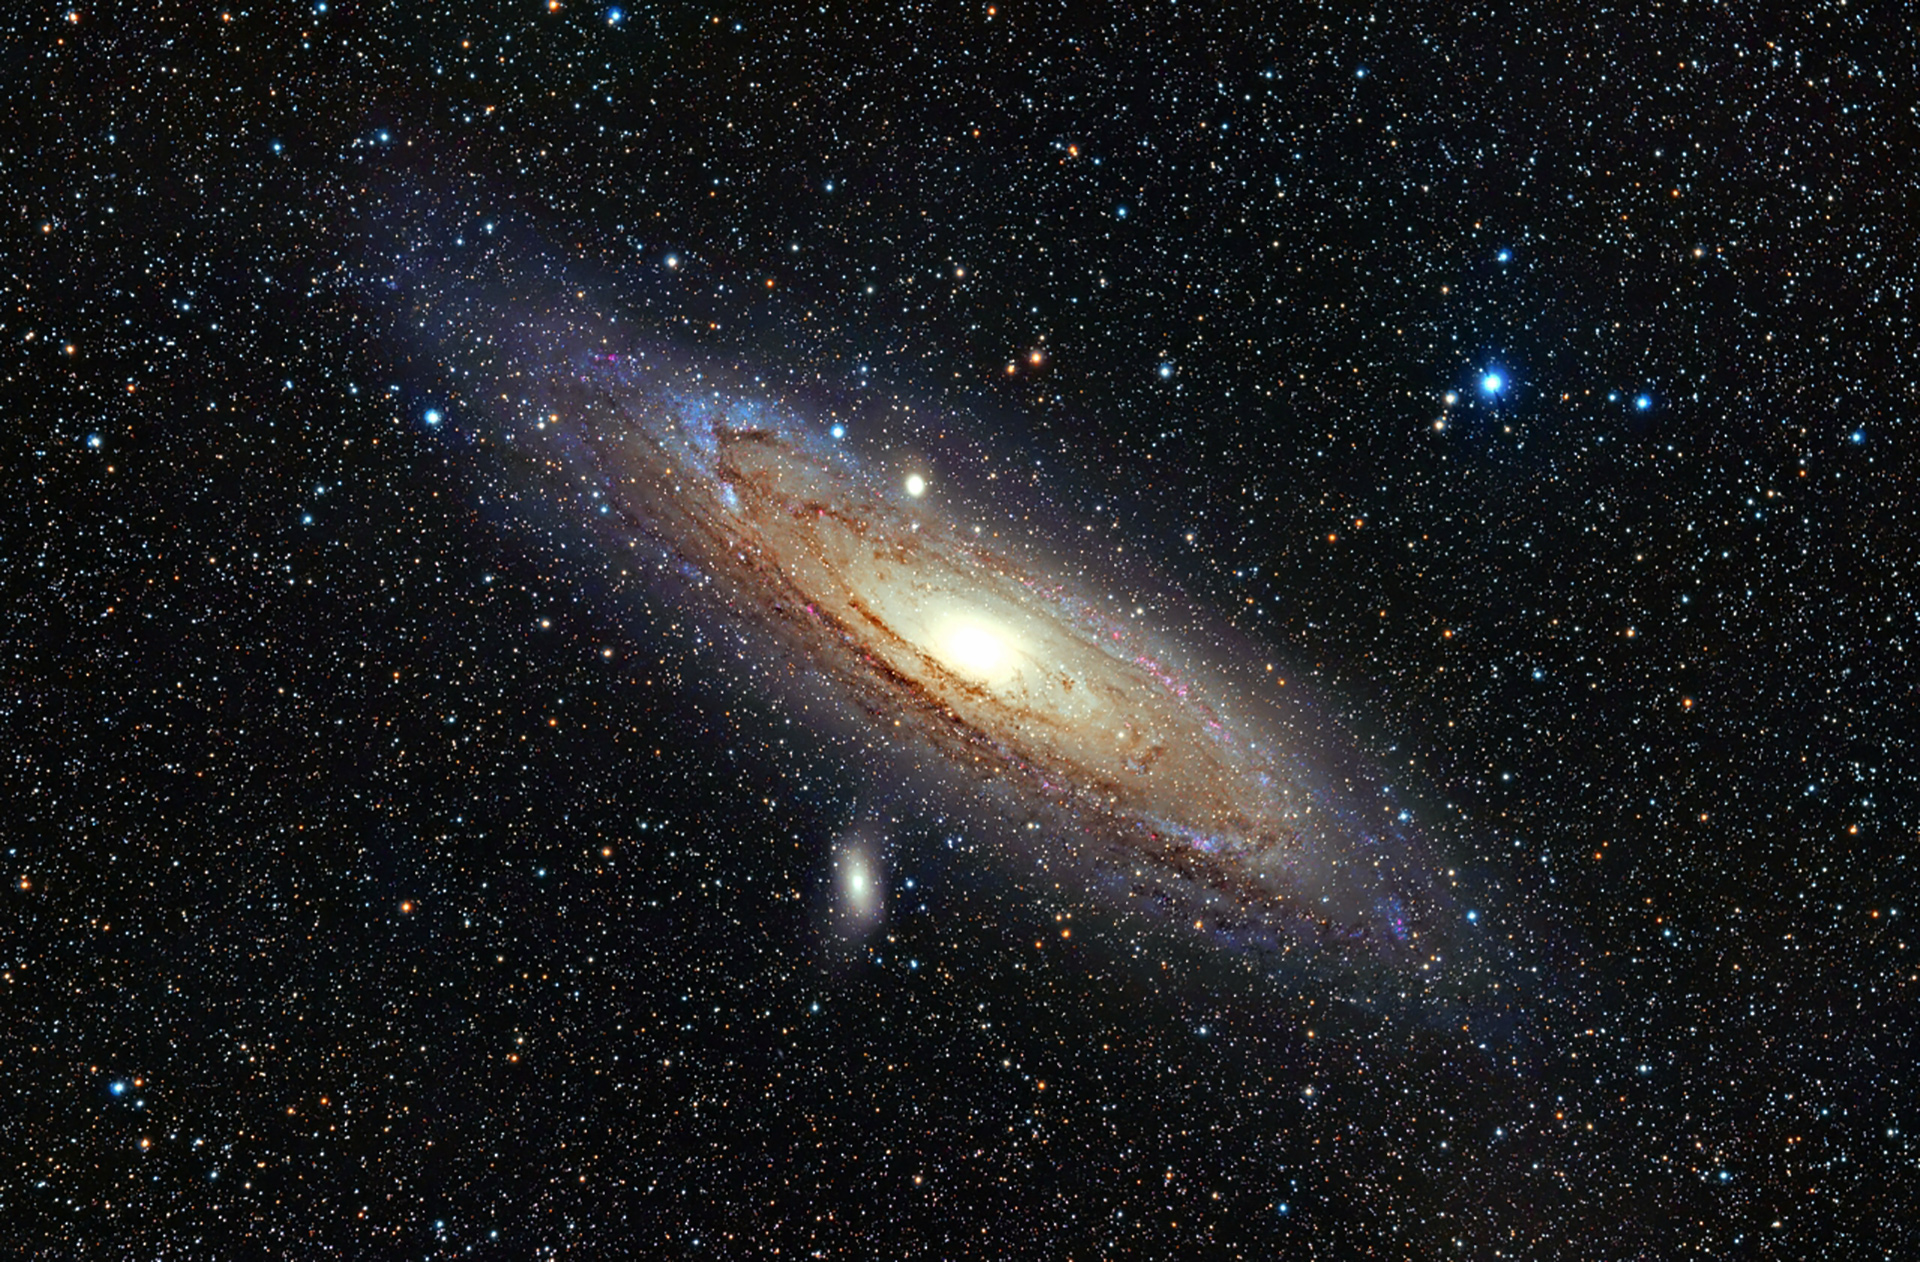 Andromeda Galaxy Wallpaper Gallery Yopriceville High Quality